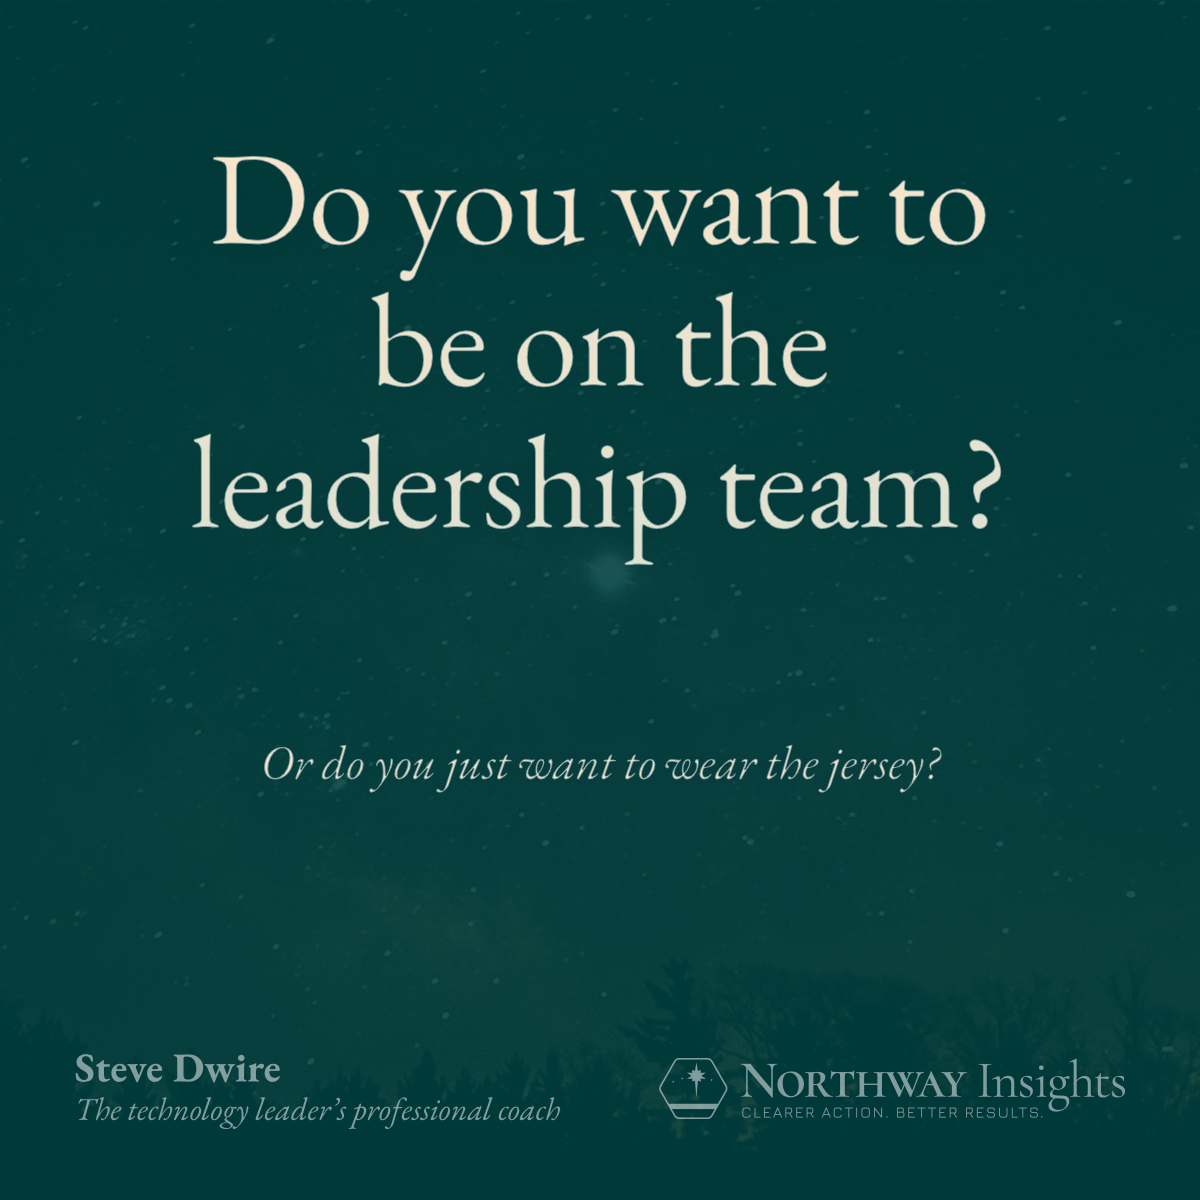 Do you want to be on the leadership team?